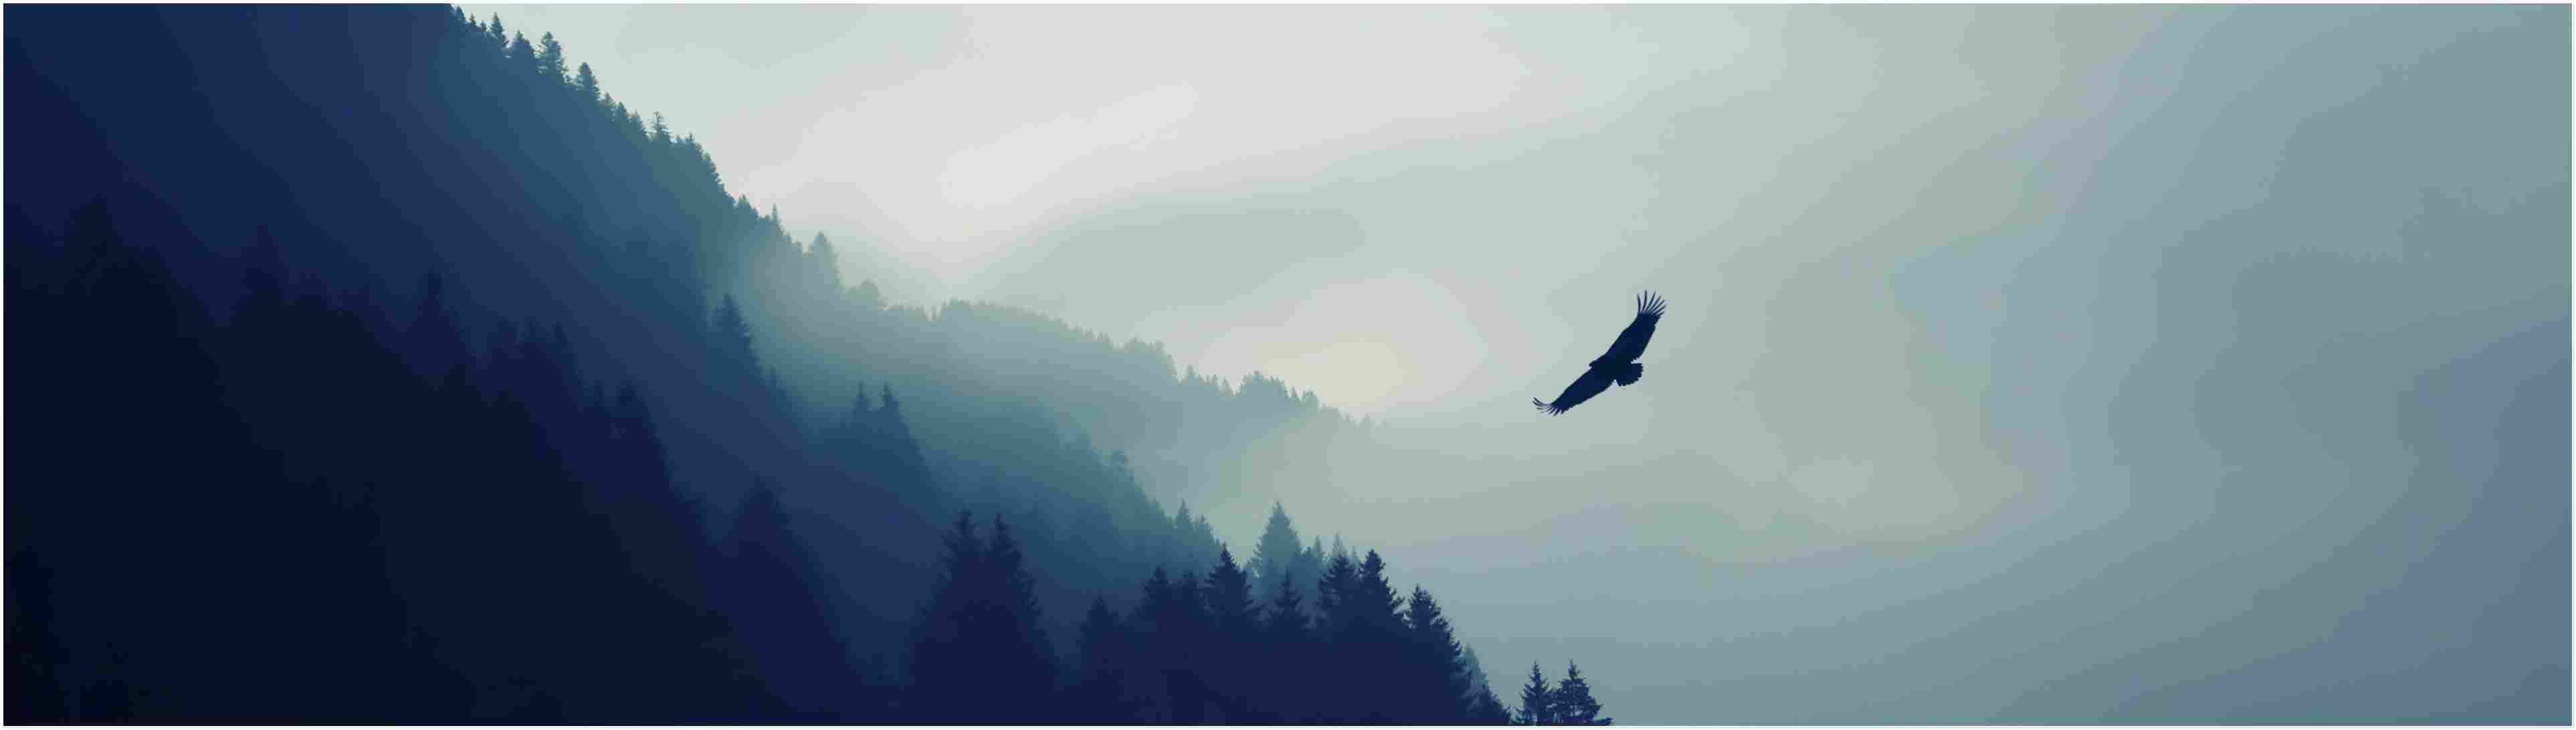 4k Dual Monitor Eagle Flying Over Forest Wallpaper